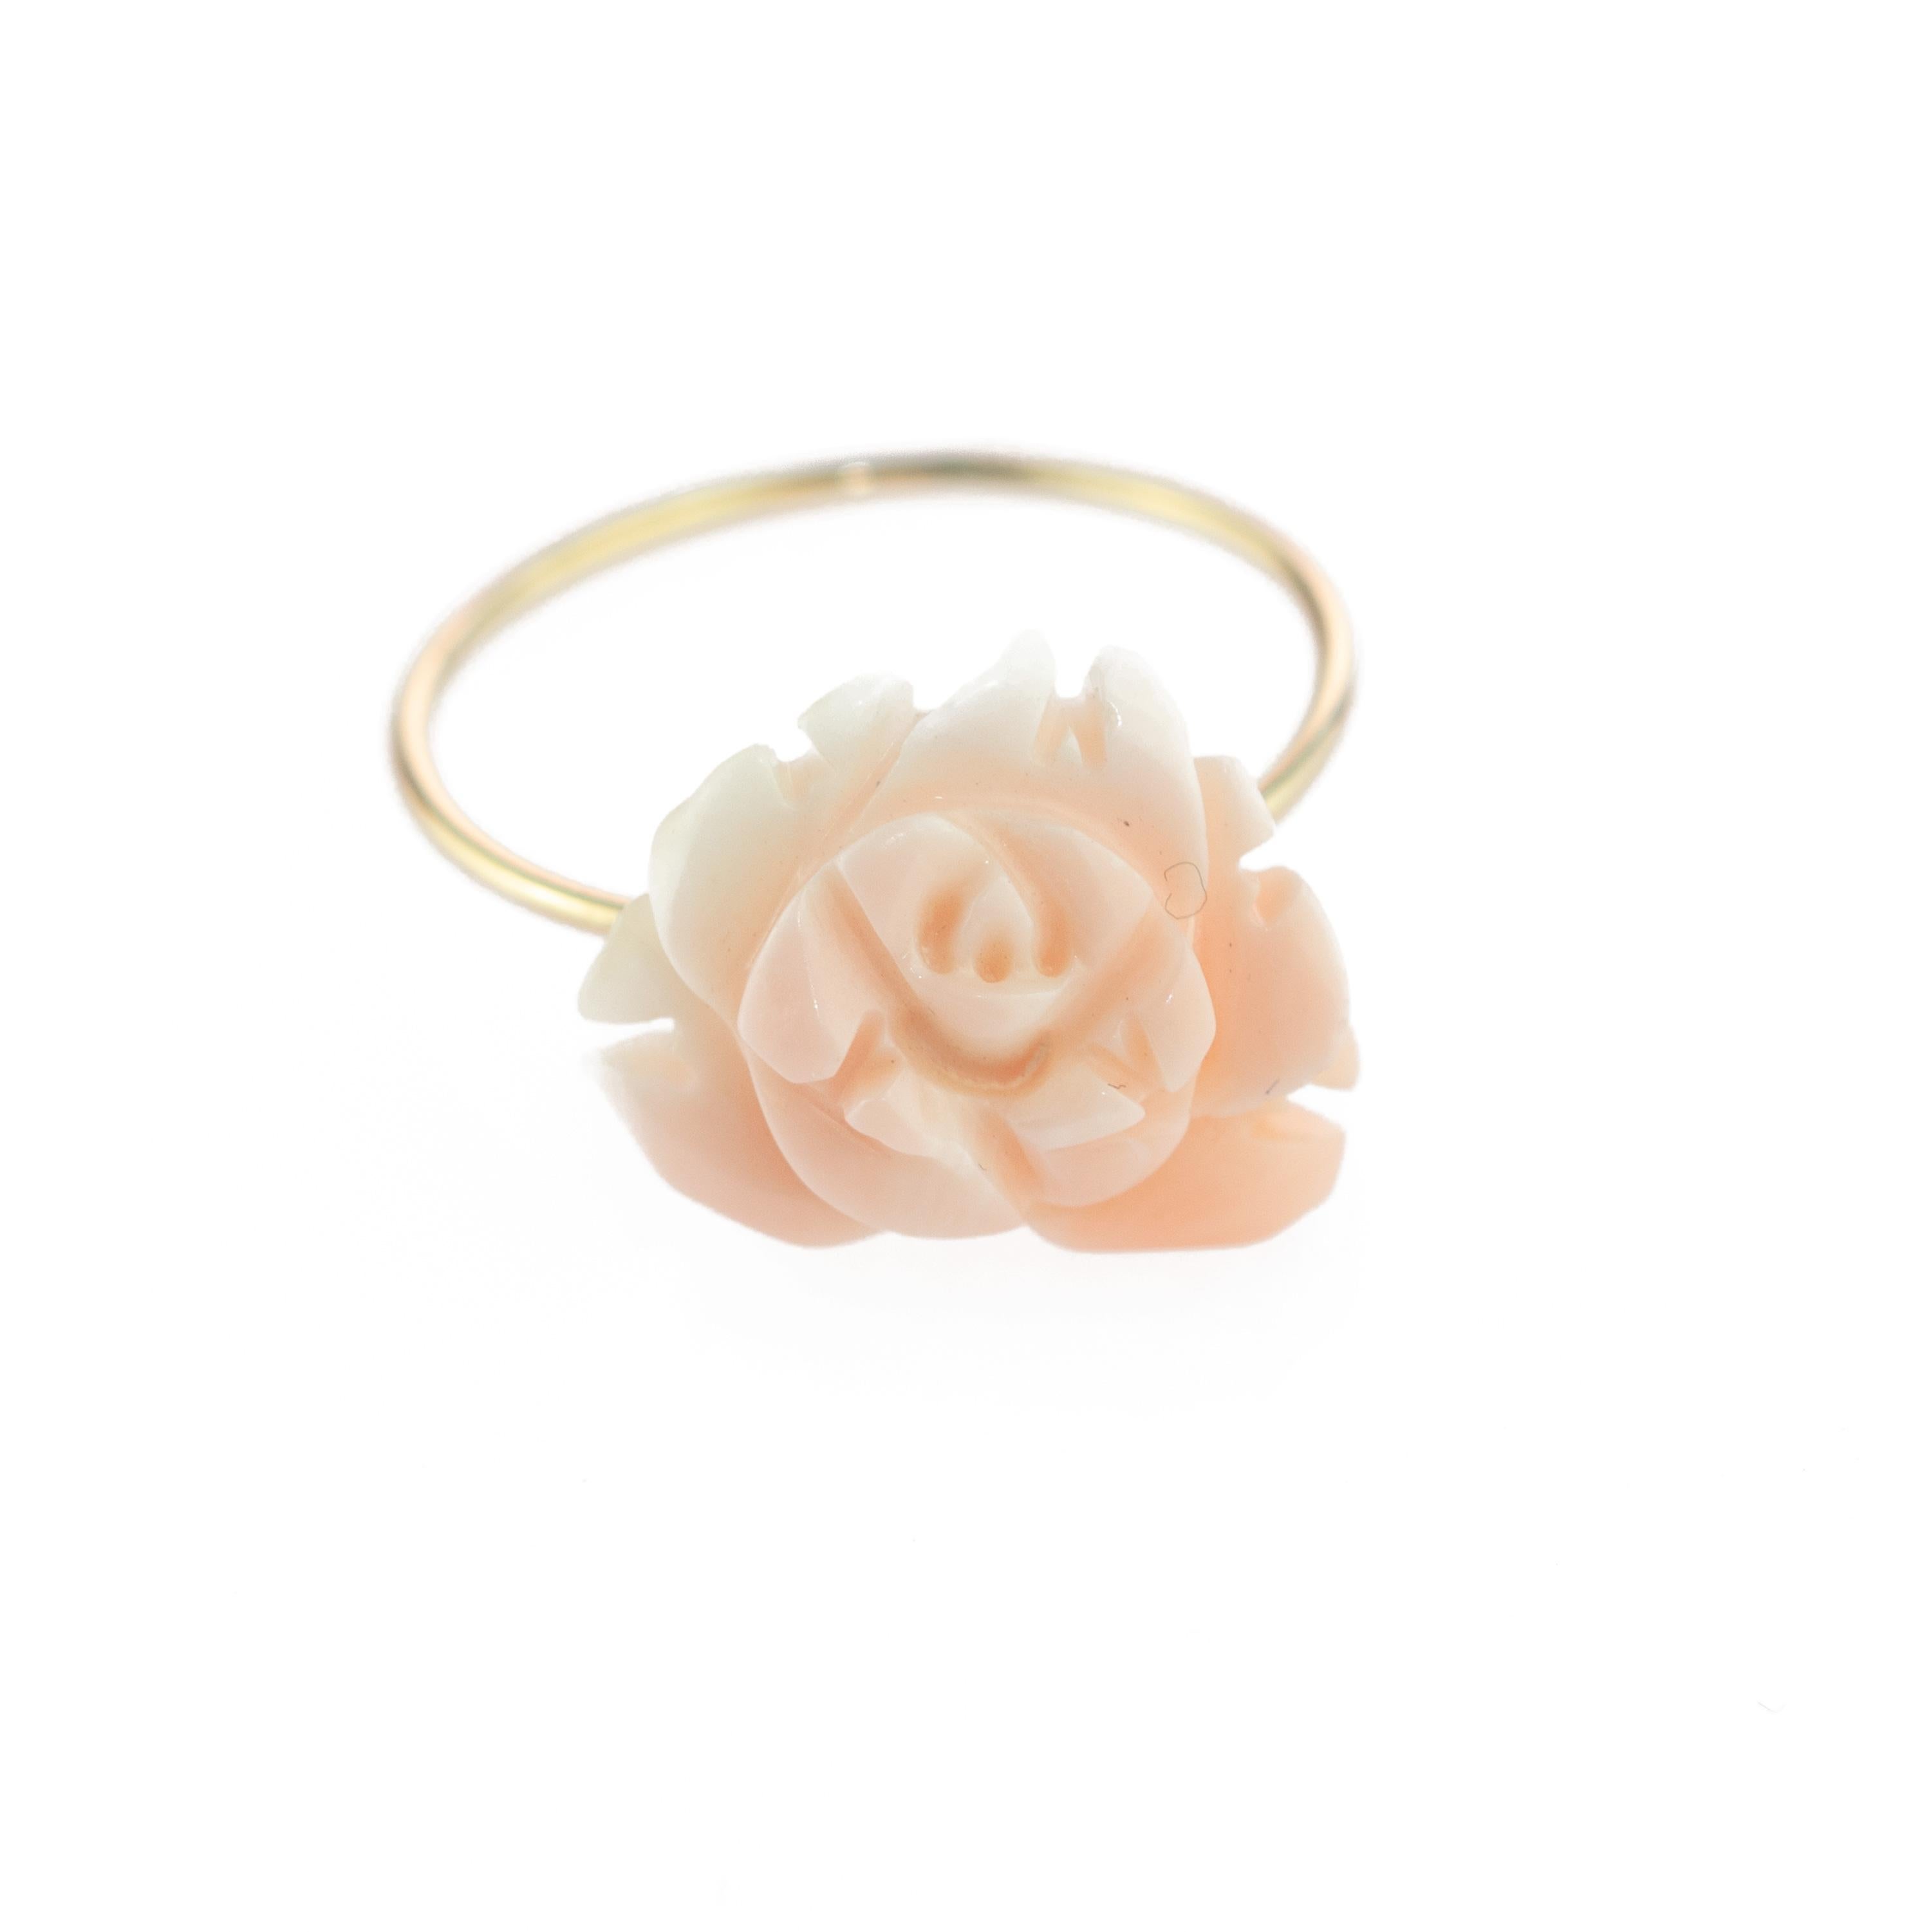 Astonishing and sweet 18 karat yellow gold and coral pink rose ring. Natural coral carved petals that evoke the italian handmade traditional crafted jewelry work. Unique rose carvings in top quality coral for a signature INTINI Jewels look. Elegant